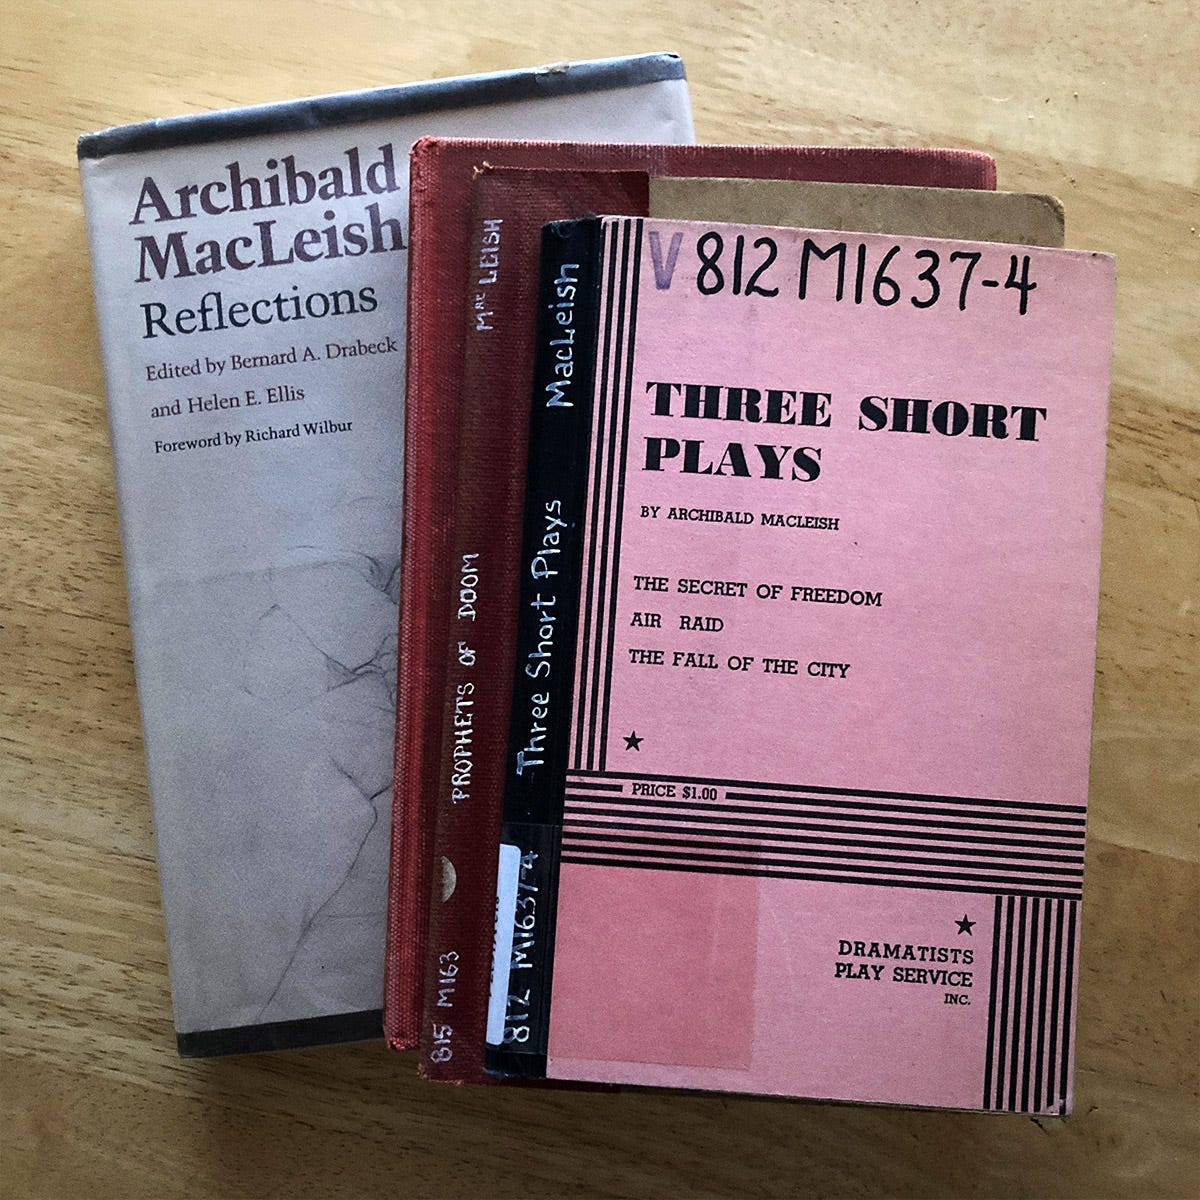 Books by Archibald MacLeish